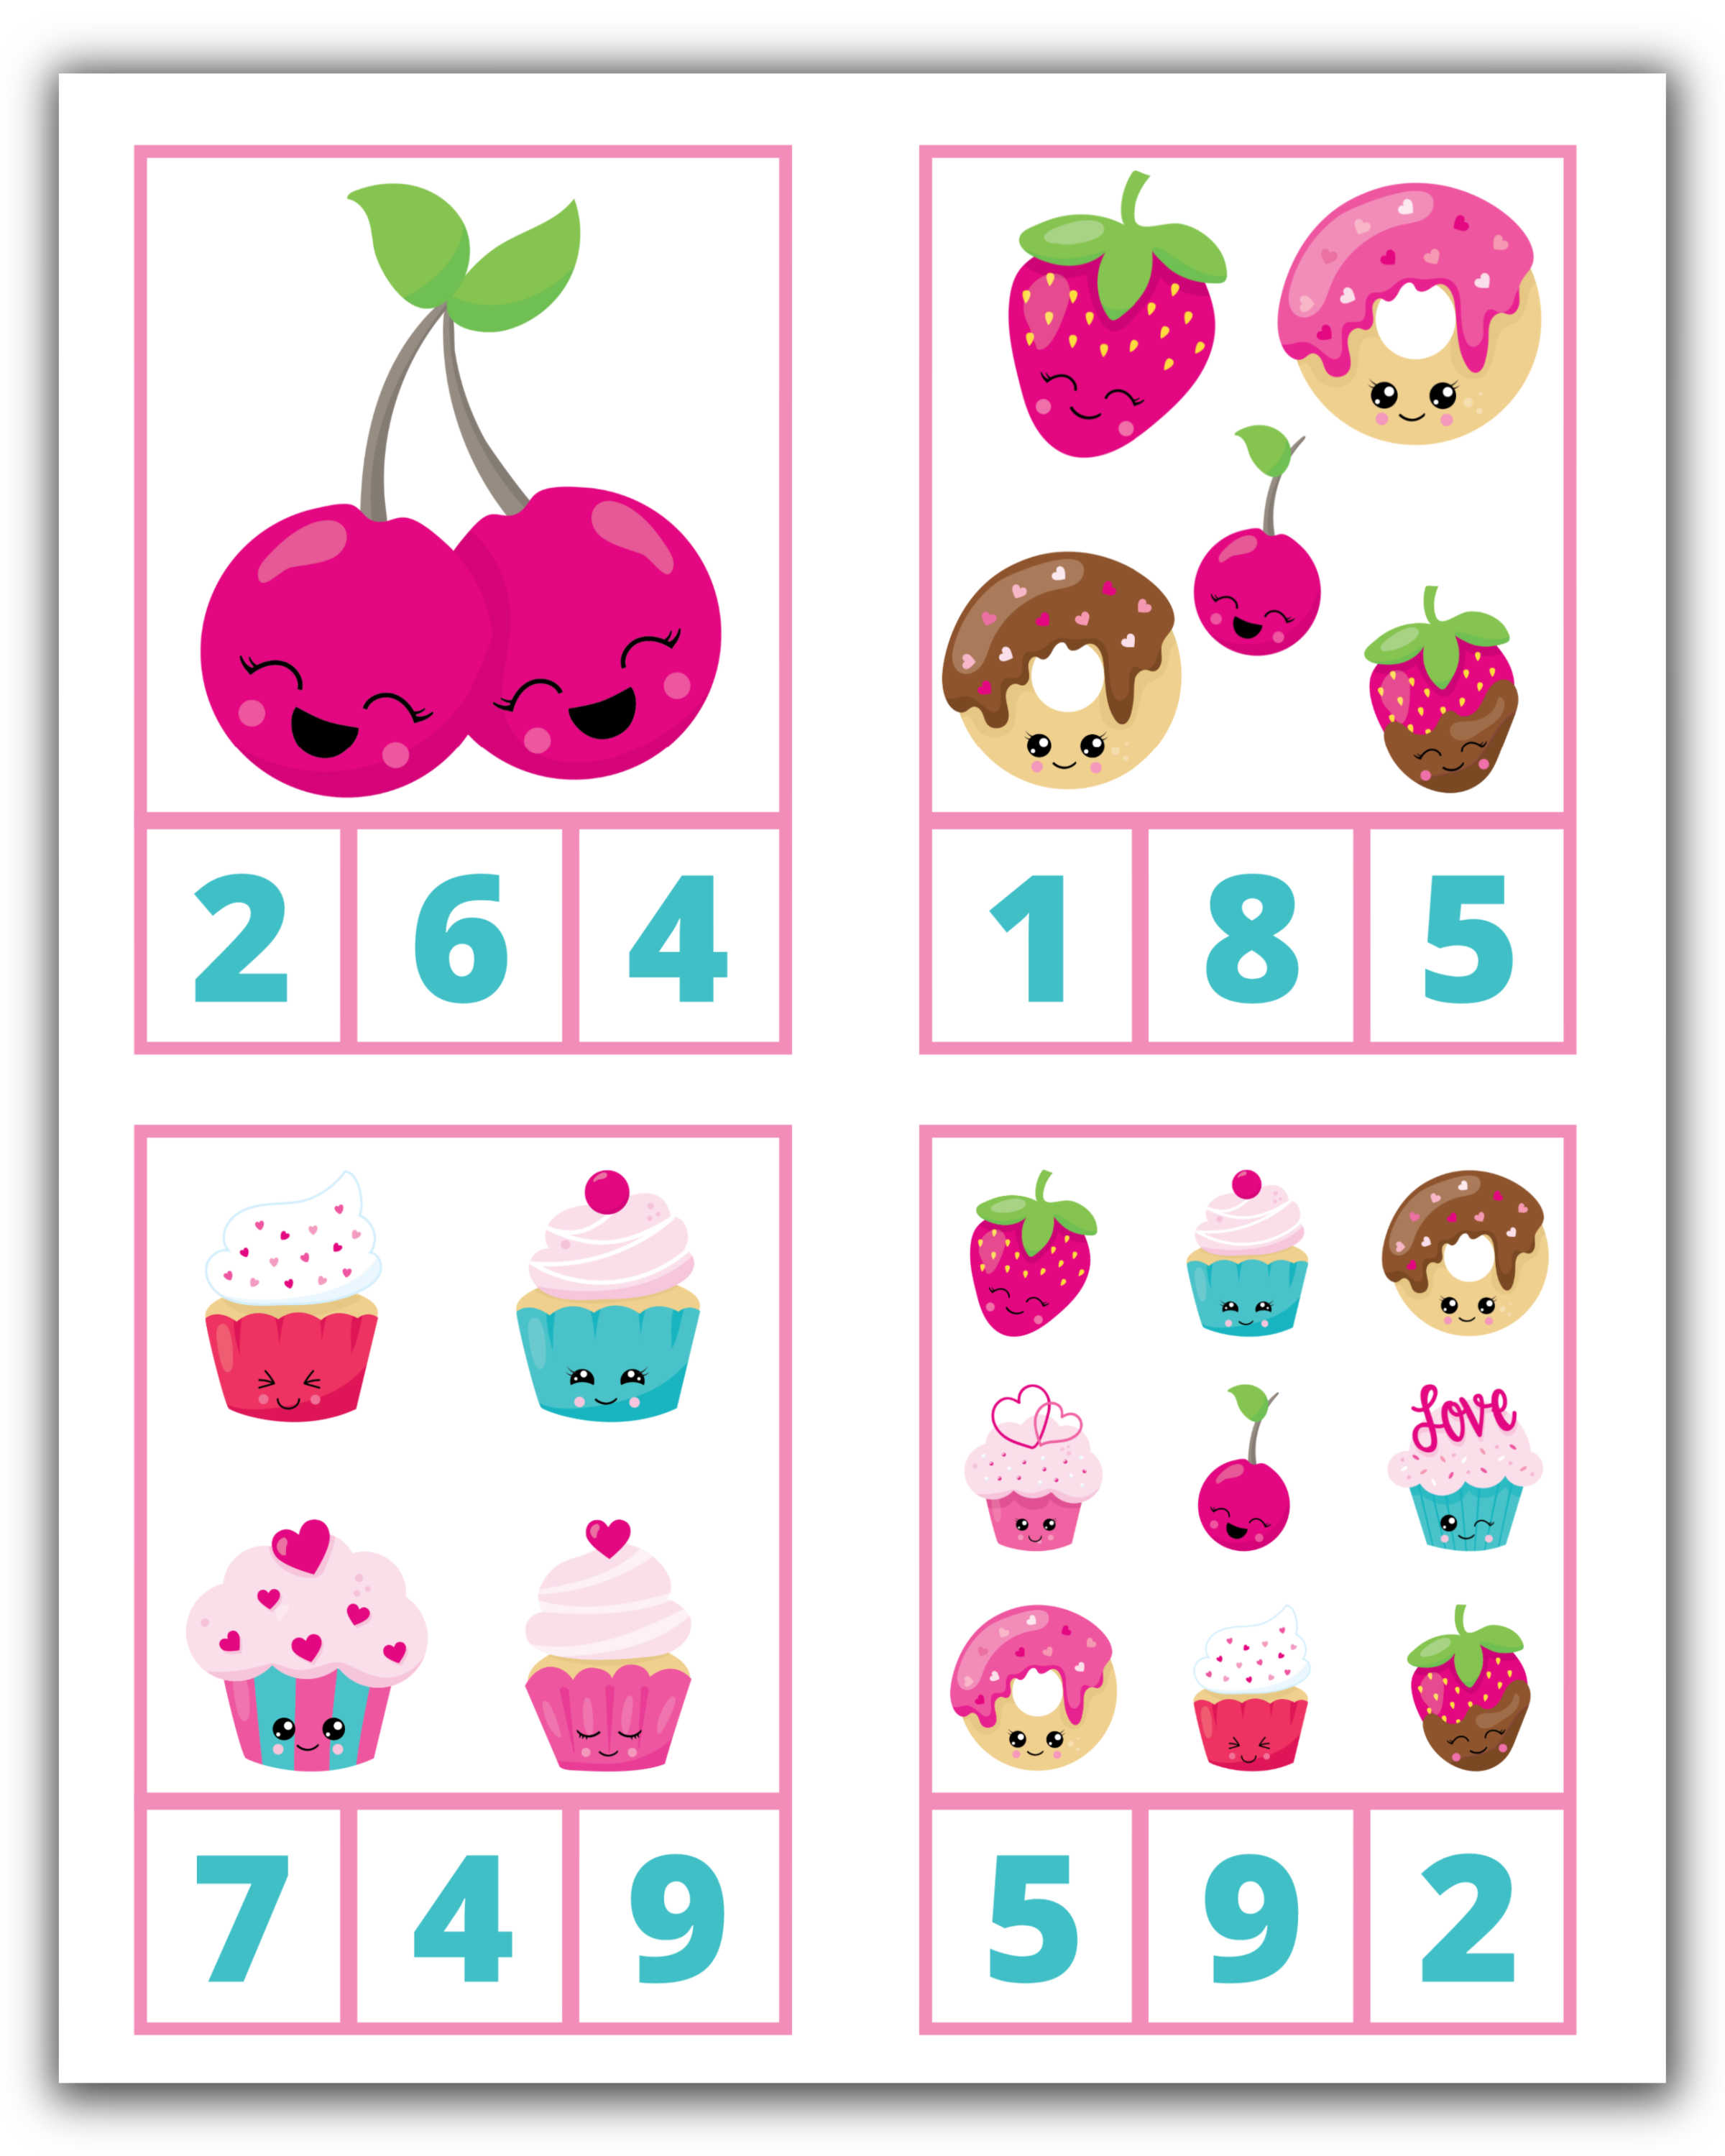 Valentine's Day Count and Clip Activity